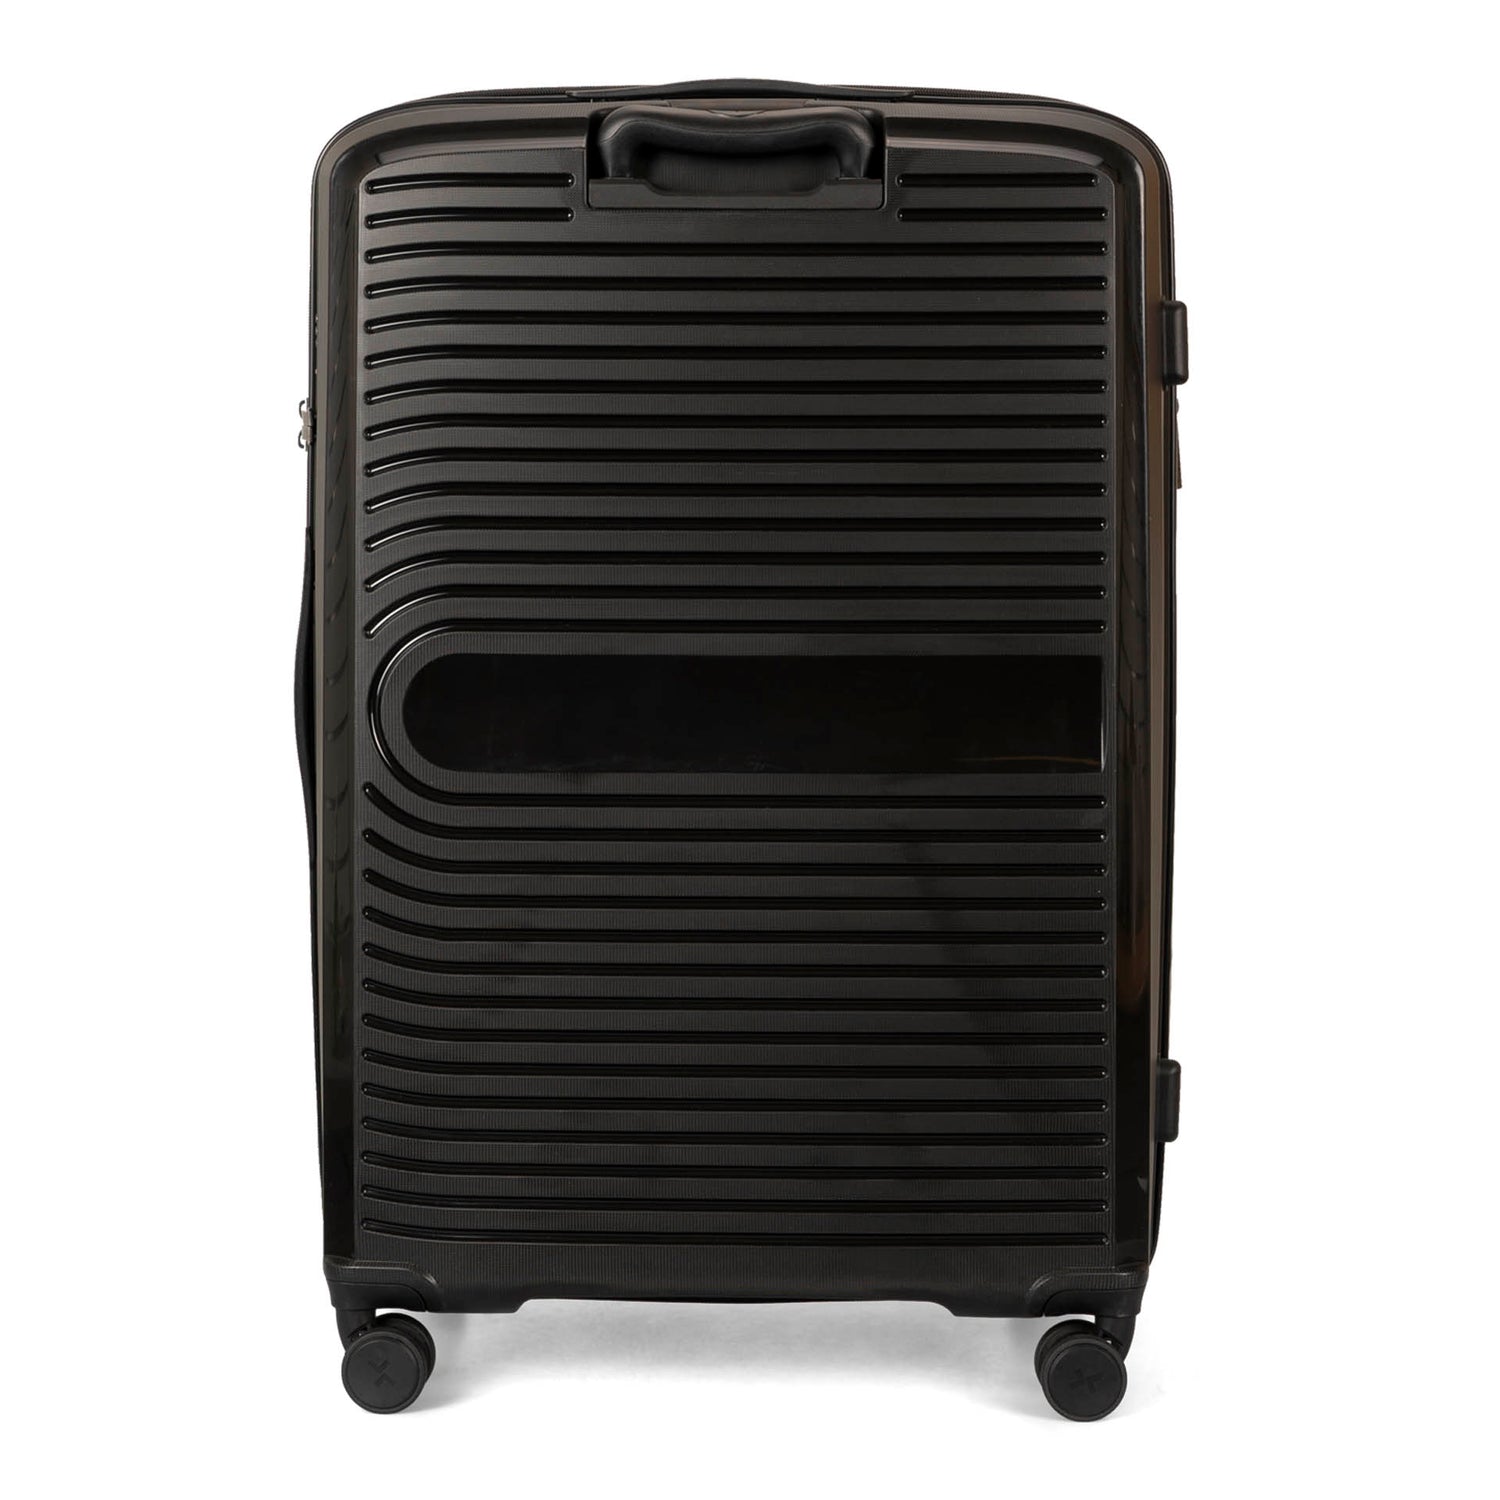 Back side of a black luggage called Dynamo designed by Tracker showing its telescopic handle and lined-pattern shell.